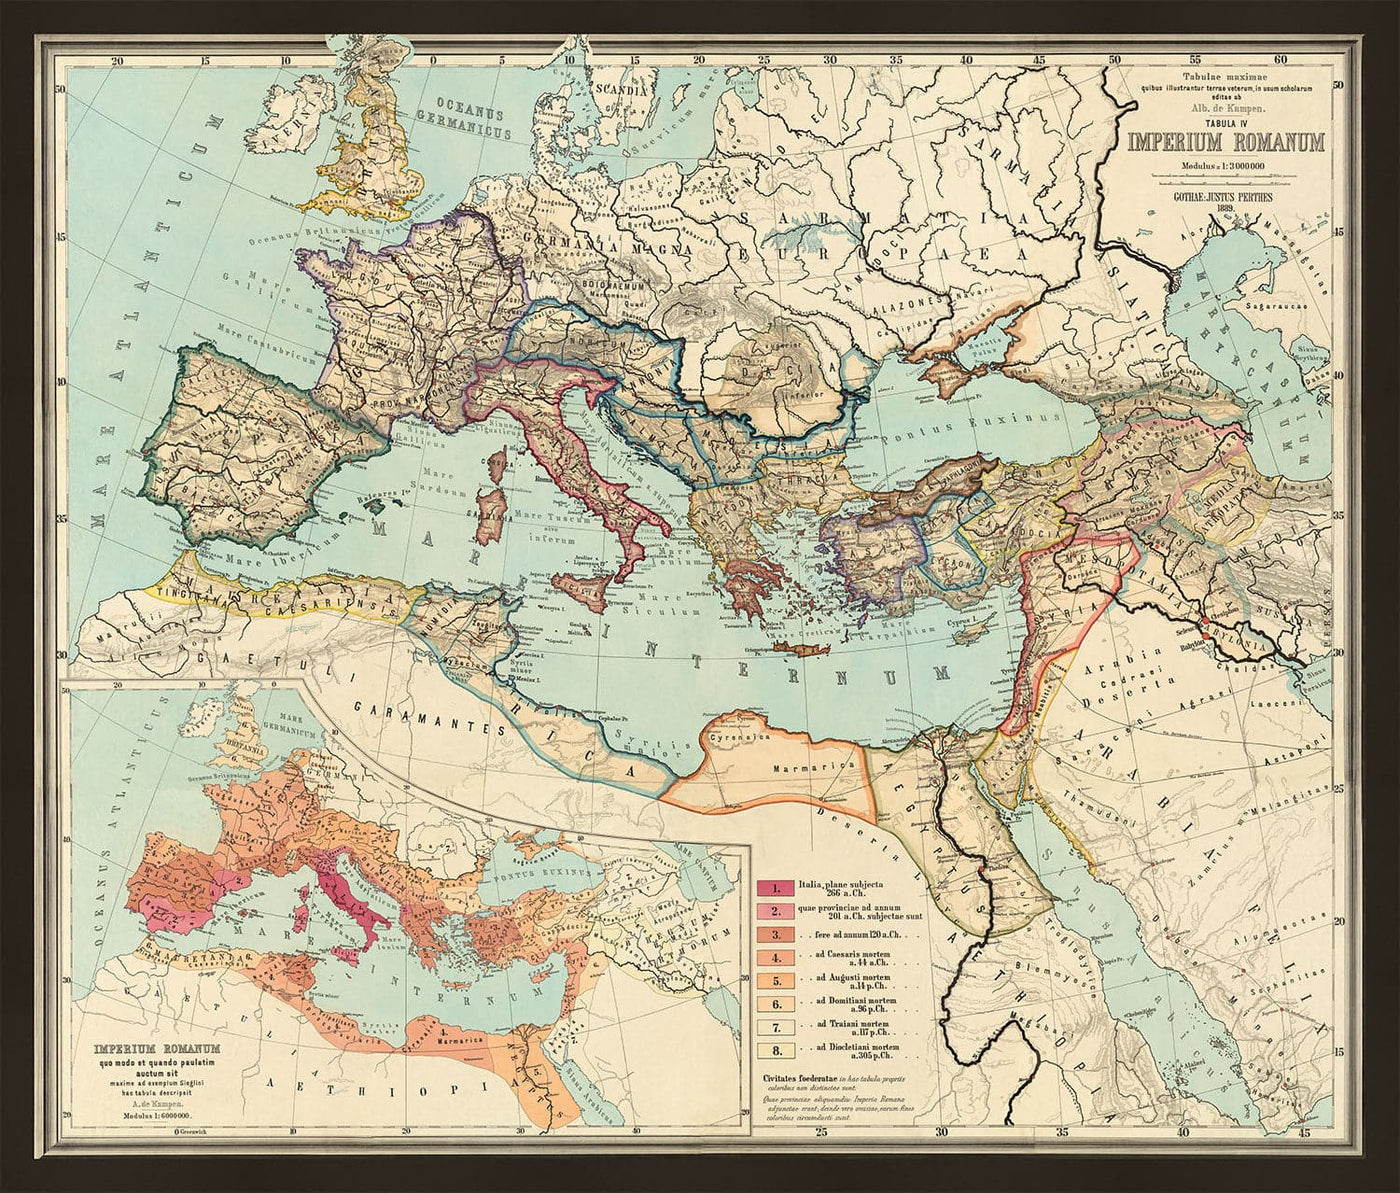 Old Roman Empire World Map From 266BC to 305AD by Perthes & Kampen, 1889 - Rare Map of Byzantine, West and East Roman Empire & Roads